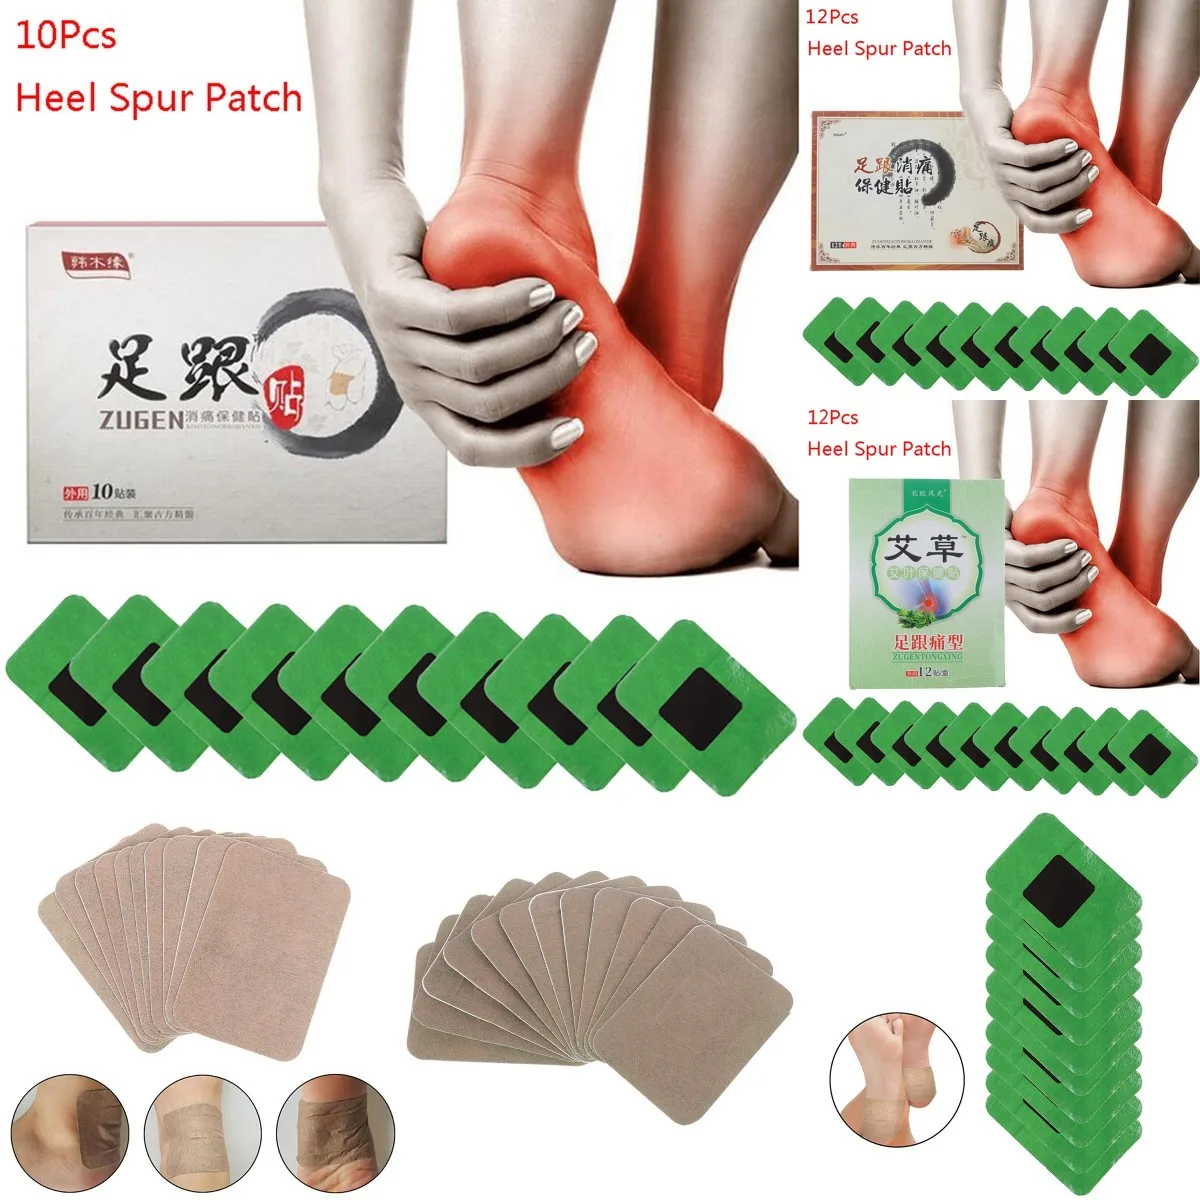 

10/12Pcs Herbal Calcaneal Spur Rapid Heel Pain Relief Patch Foot Care Treatment Plaster Foot Tool Heel Spur Pain Relief Patch